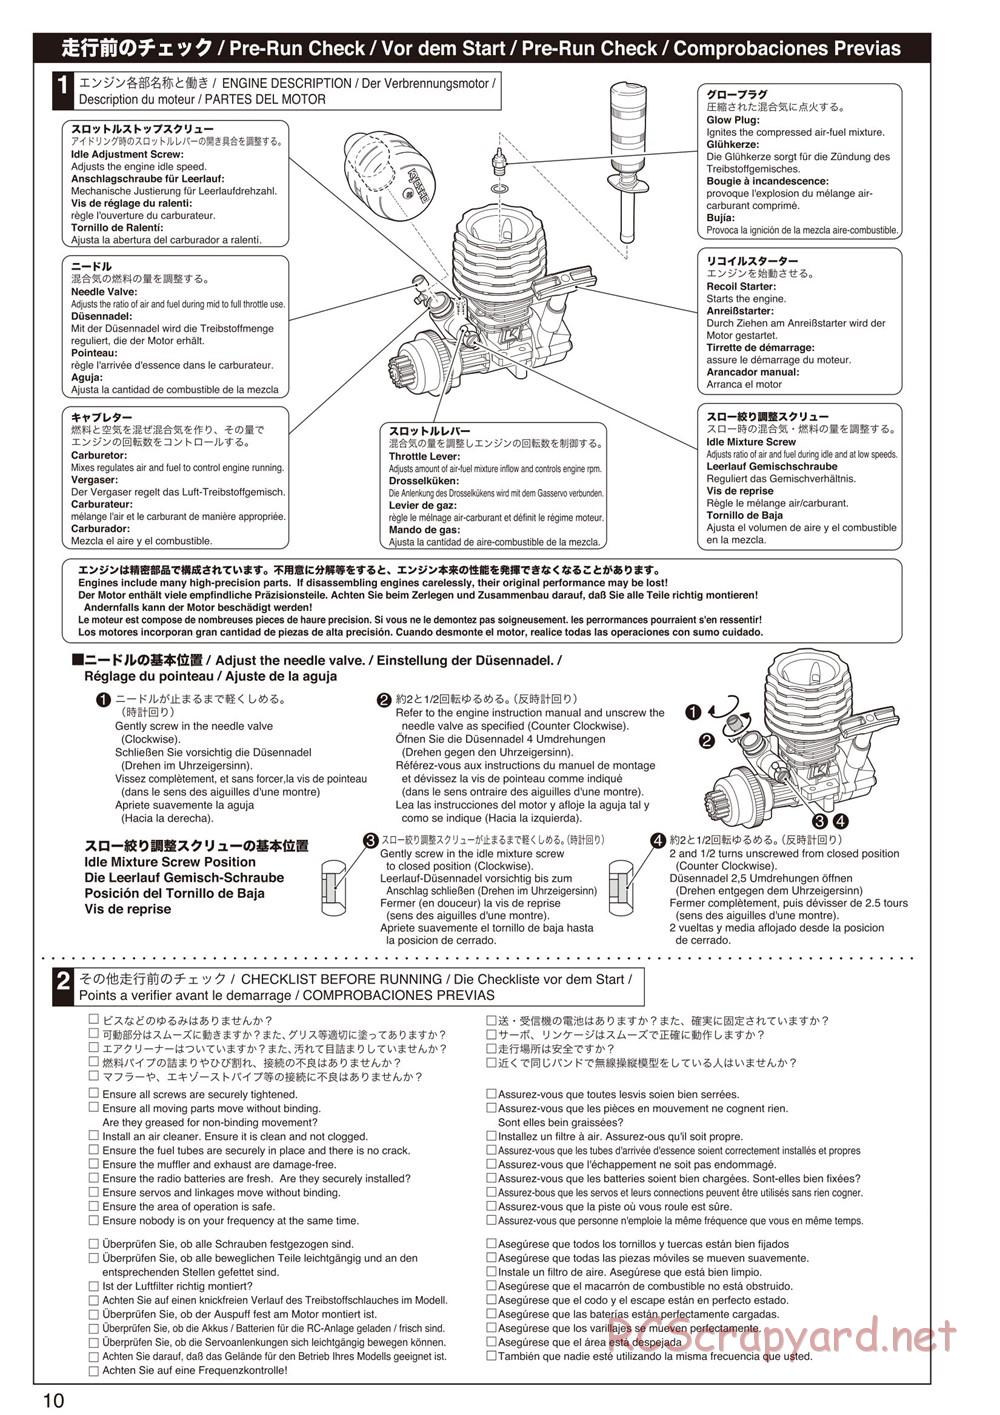 Kyosho - DRX - Manual - Page 10